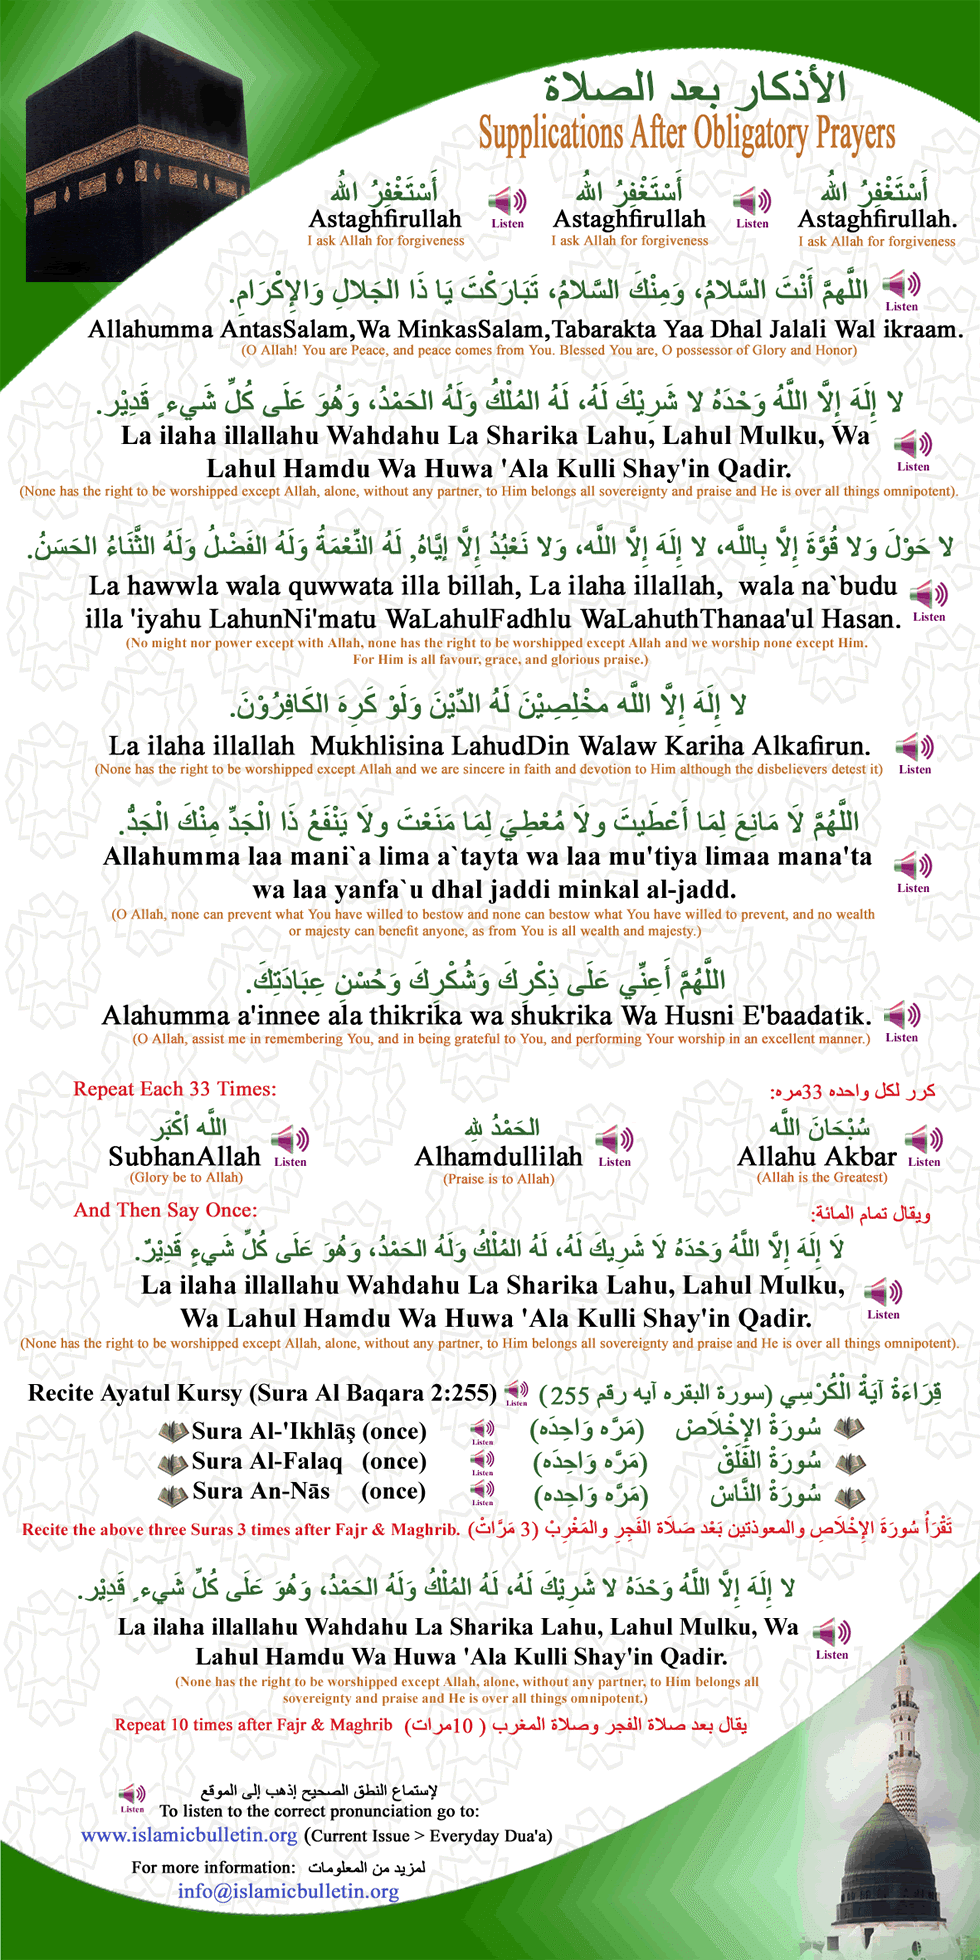 Supplications After Obligatory Prayers